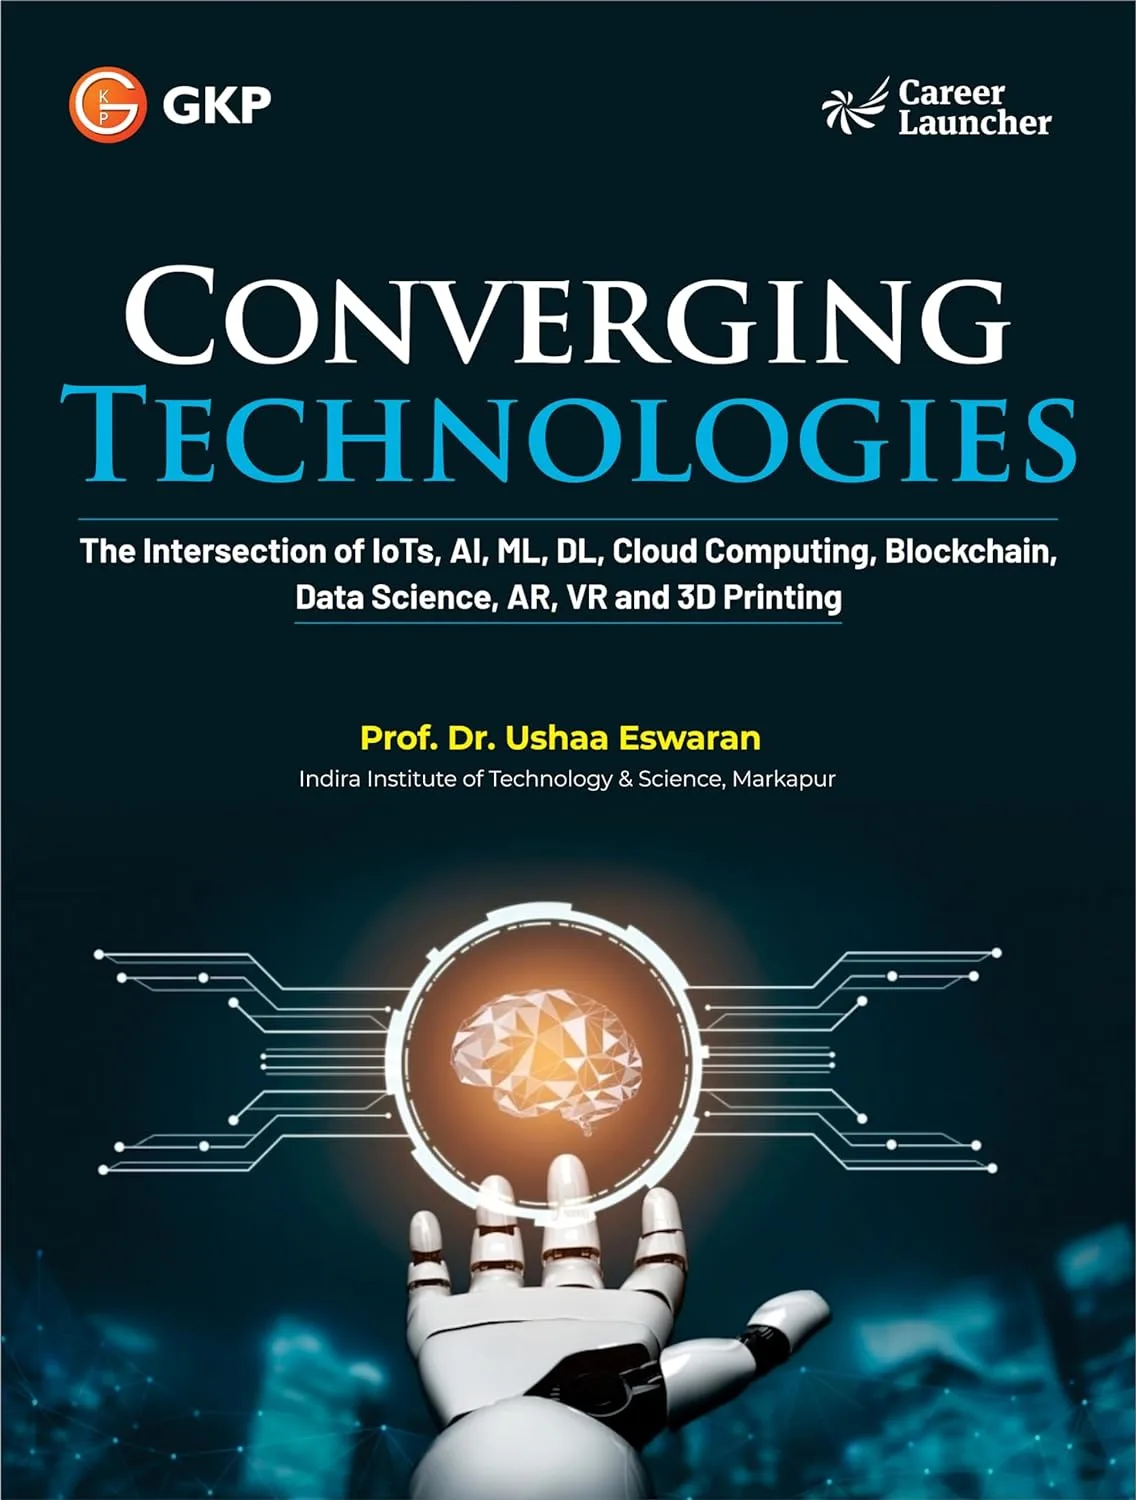 GKP Converging Technologies: The Intersection of IoTs, AI, ML, DL, Cloud Computing, Blockchain, Data Science, AR, VR, and 3D Printing